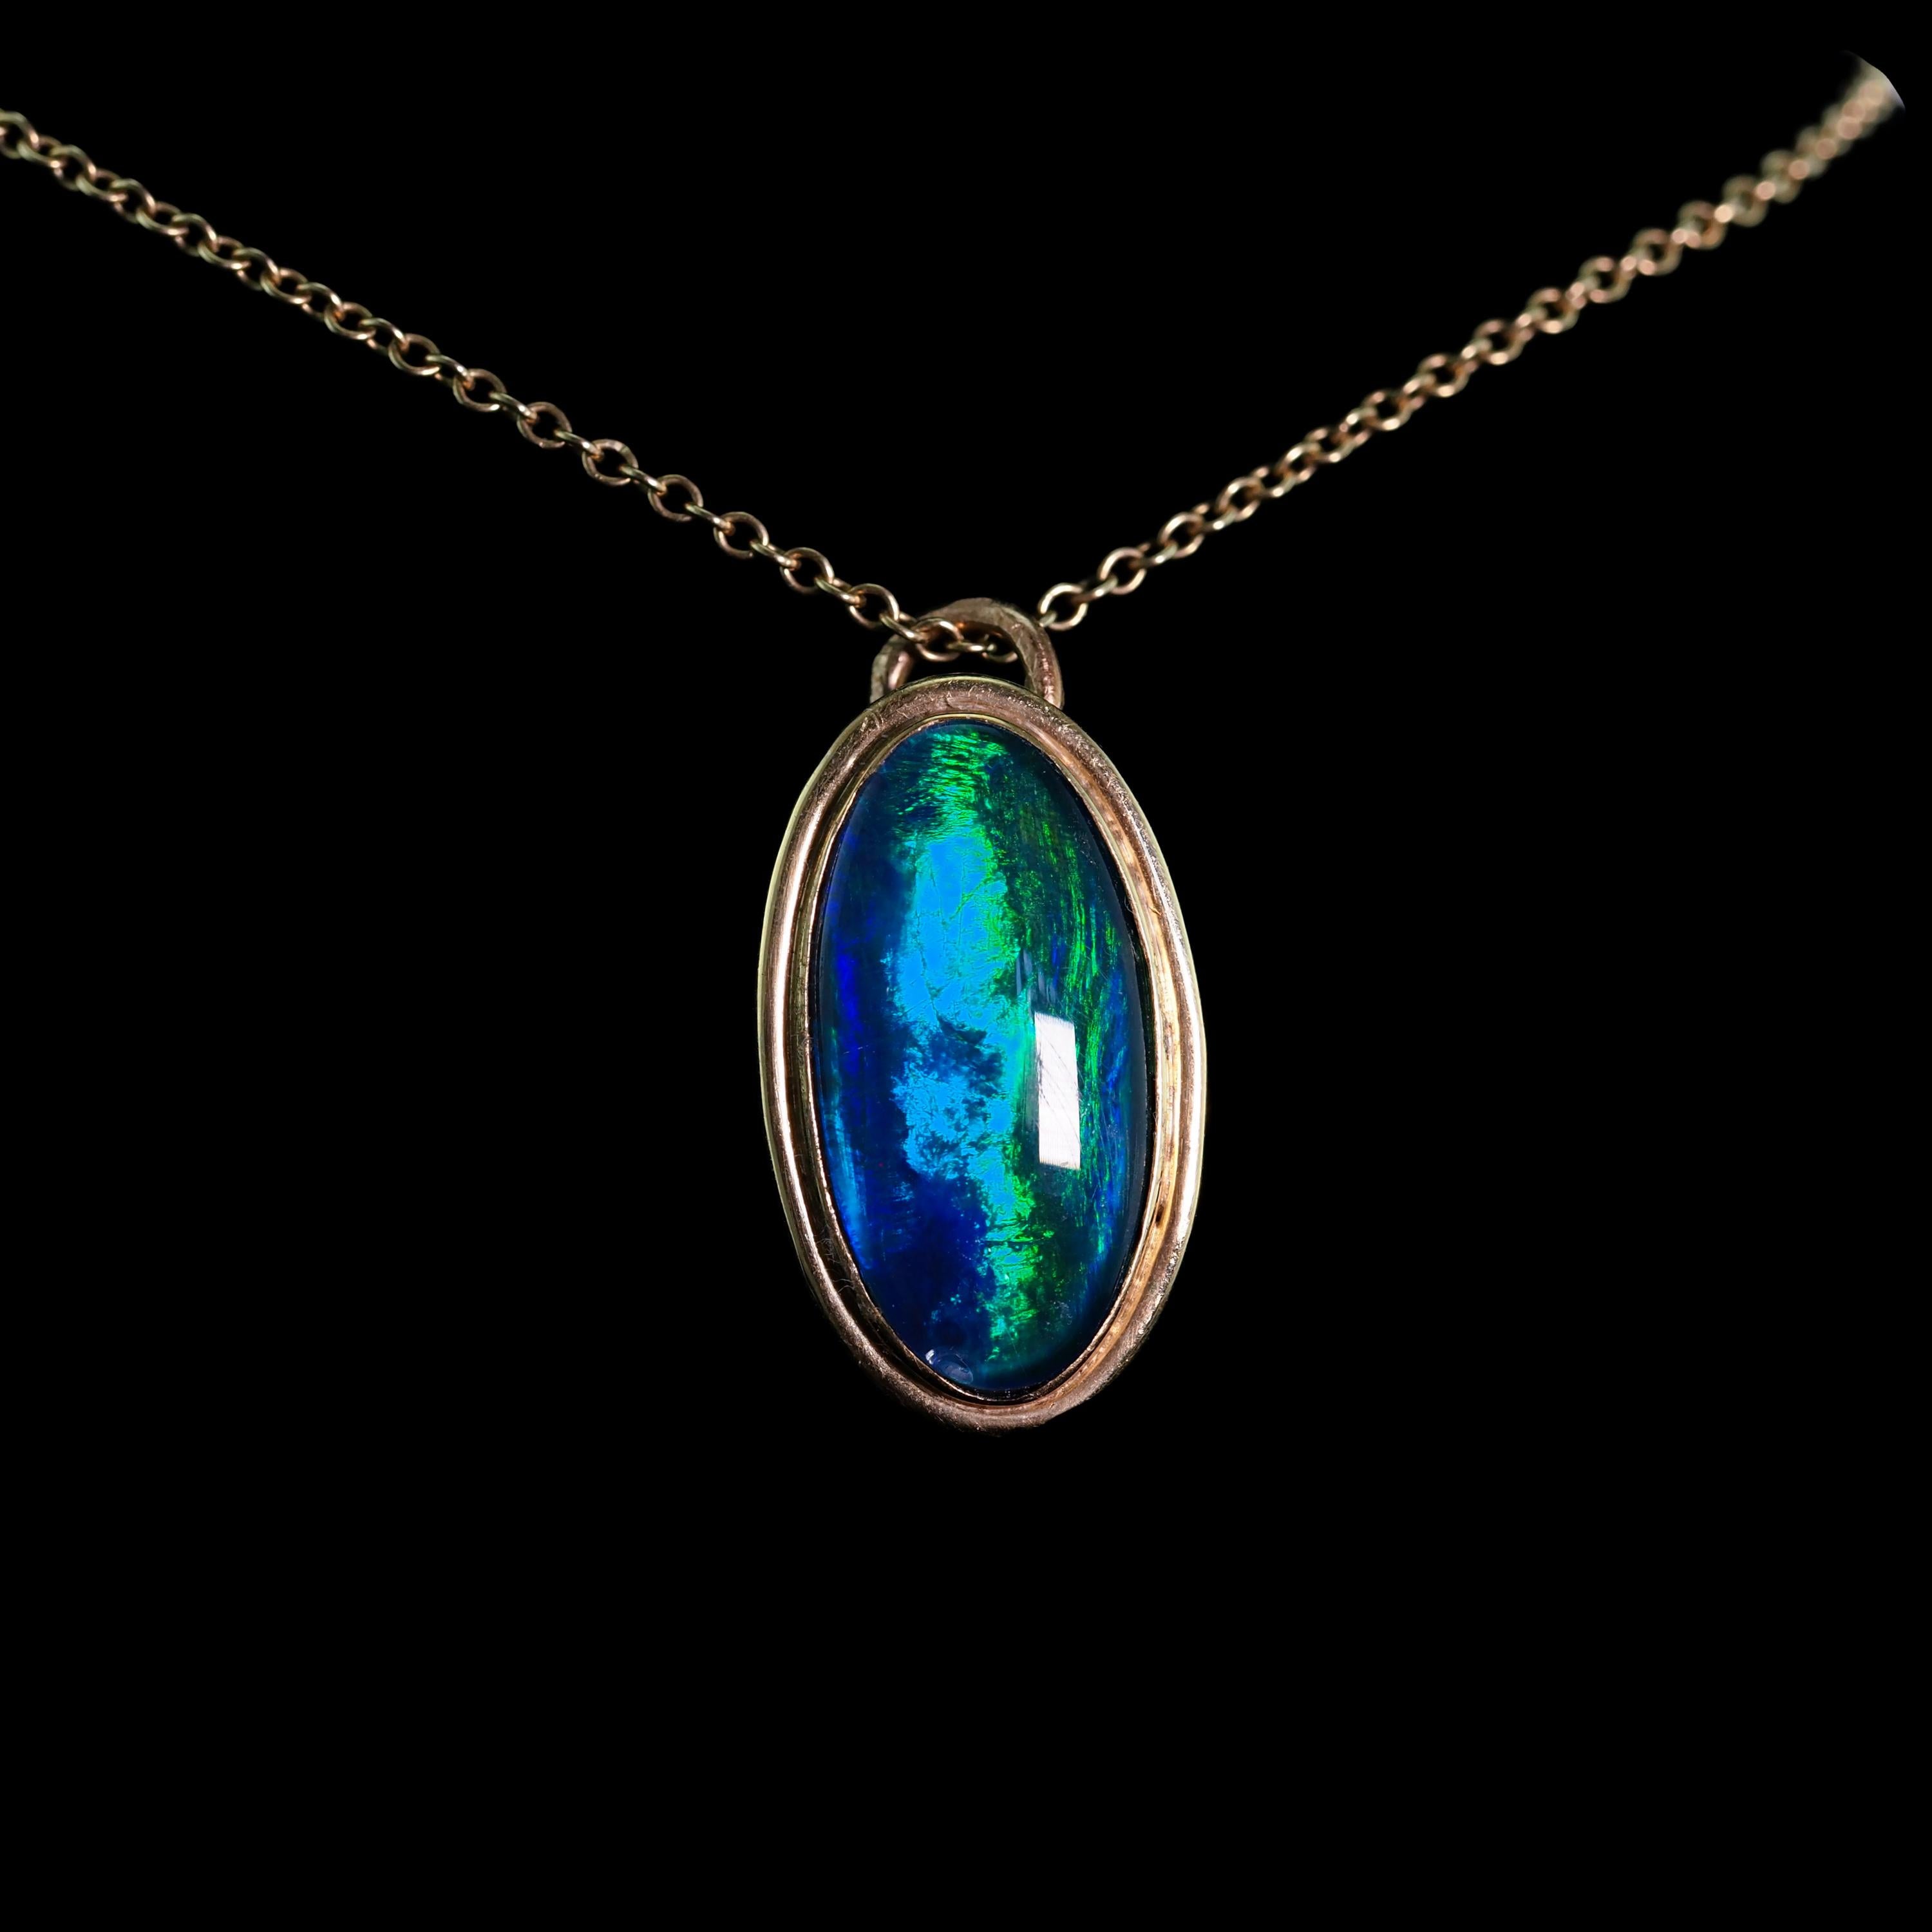 9K Gold Blue/Green Ammolite Pendant & Chain Necklace In Good Condition For Sale In London, GB